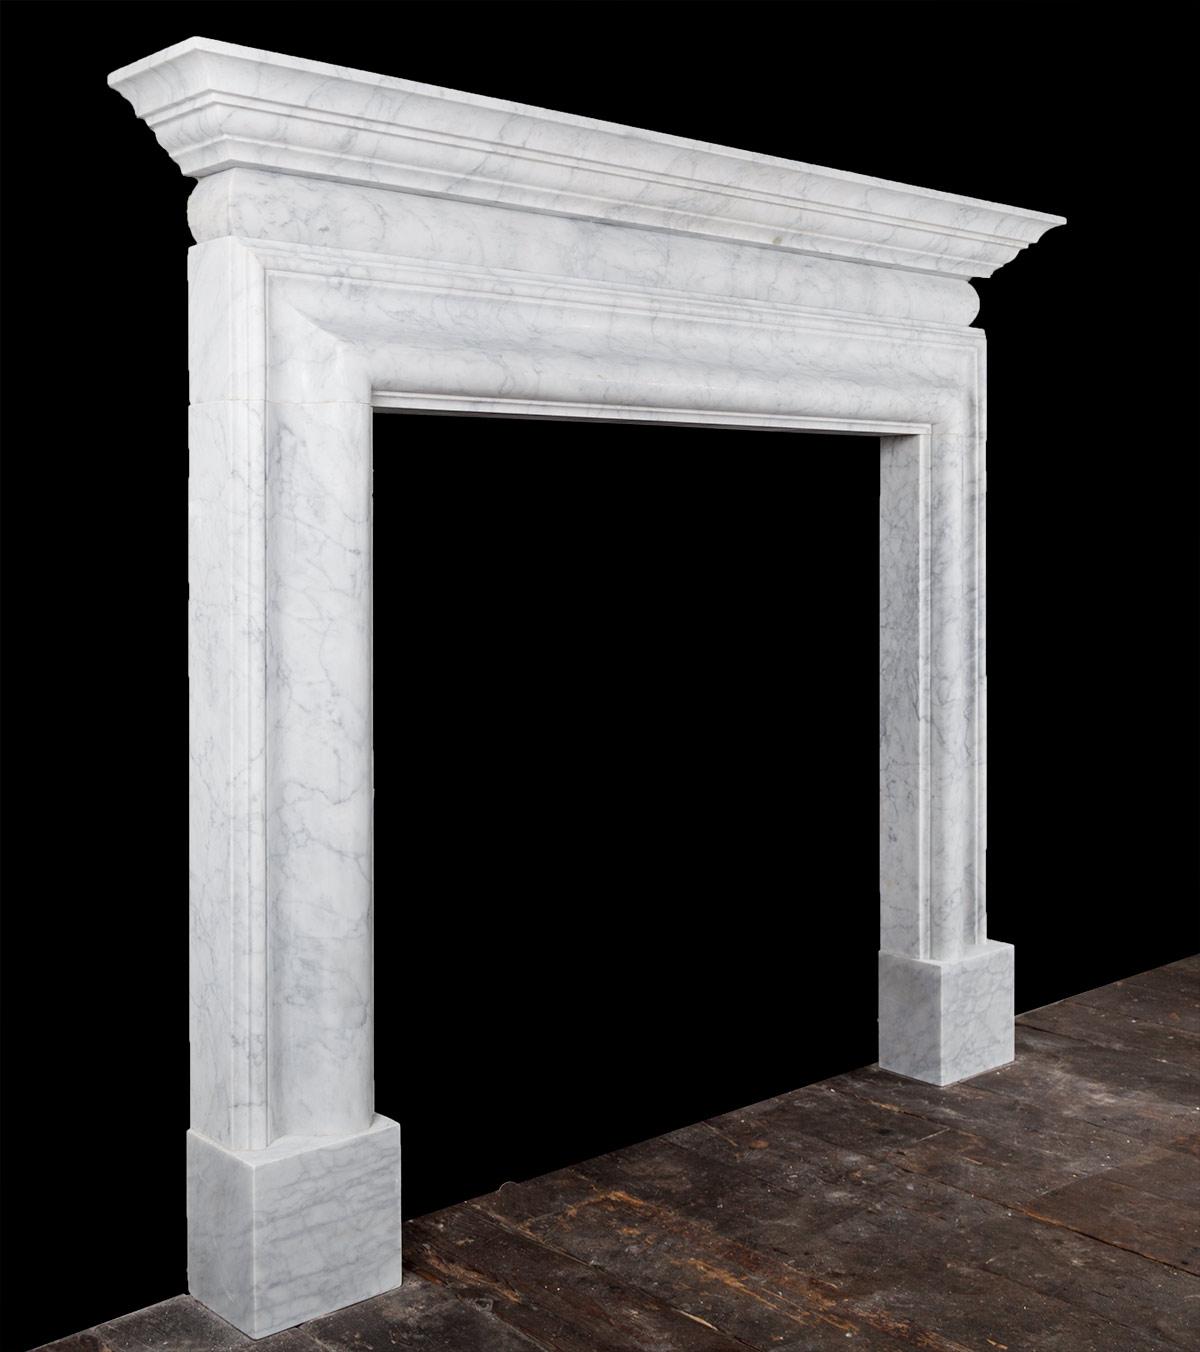 The fireplace has a molded bolection frame on plain plinths, above the frame rests a barrel shaped frieze and stepped cornice shelf. A classic design fashionable in Europe for over three hundred years.

 